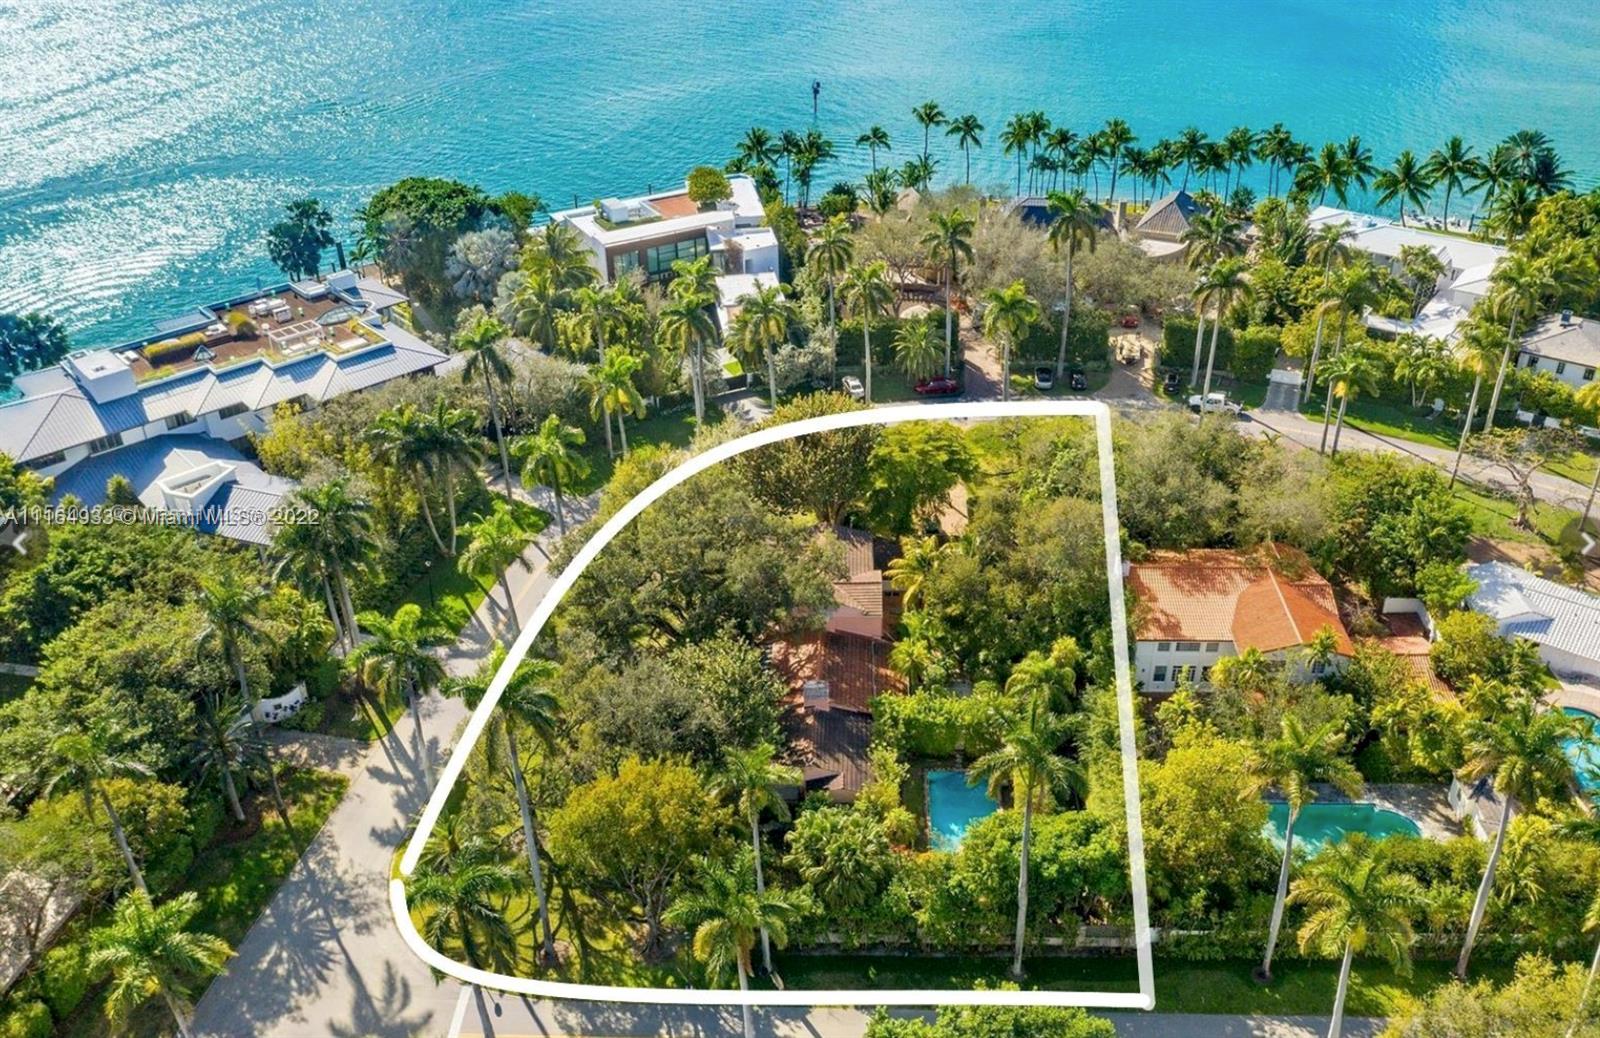 Rare opportunity to live on exclusive, guard gated LA GORCE ISLAND! Build your dream home on this 25,896-SF CORNER property with majestic oak trees; one of the best and largest dry lots on the island. You can build an over 10,000-SF home and still have substantial land for ultimate privacy. La Gorce Island offers a tranquil, private setting amongst beautifully landscaped streets. Enjoy 24-hour security, a gated entrance, and marine patrol. Minutes to Indian Creek Country Club, La Gorce Country Club, Bal Harbor, South Beach, and the ocean. Current house being sold AS-IS. Lot SF is as per survey. Renderings and plans available for a new home with architecture by Kobi Karp